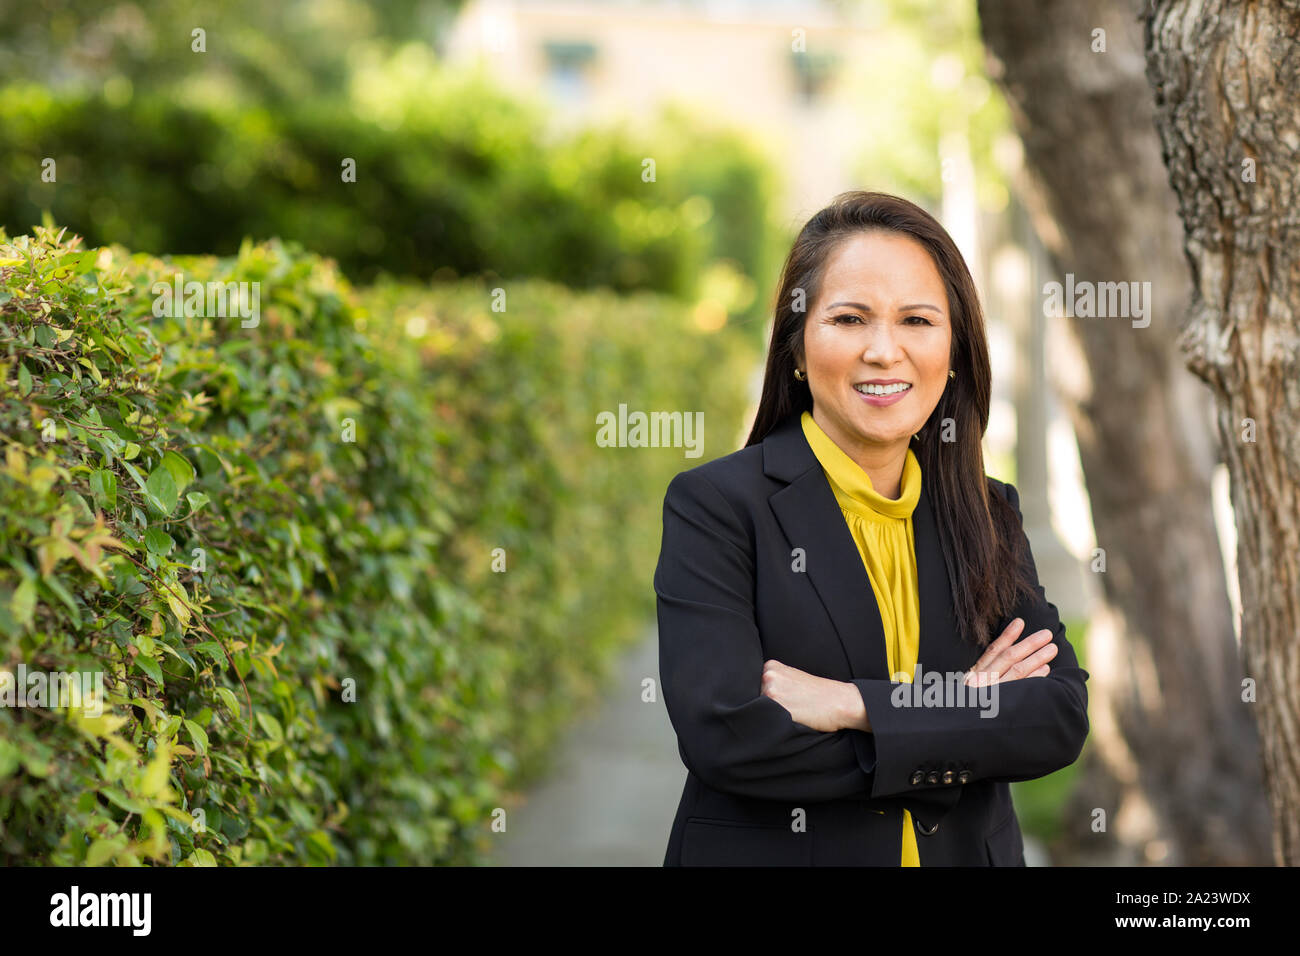 Portrait of a mature Asian woman in a business suit. Stock Photo